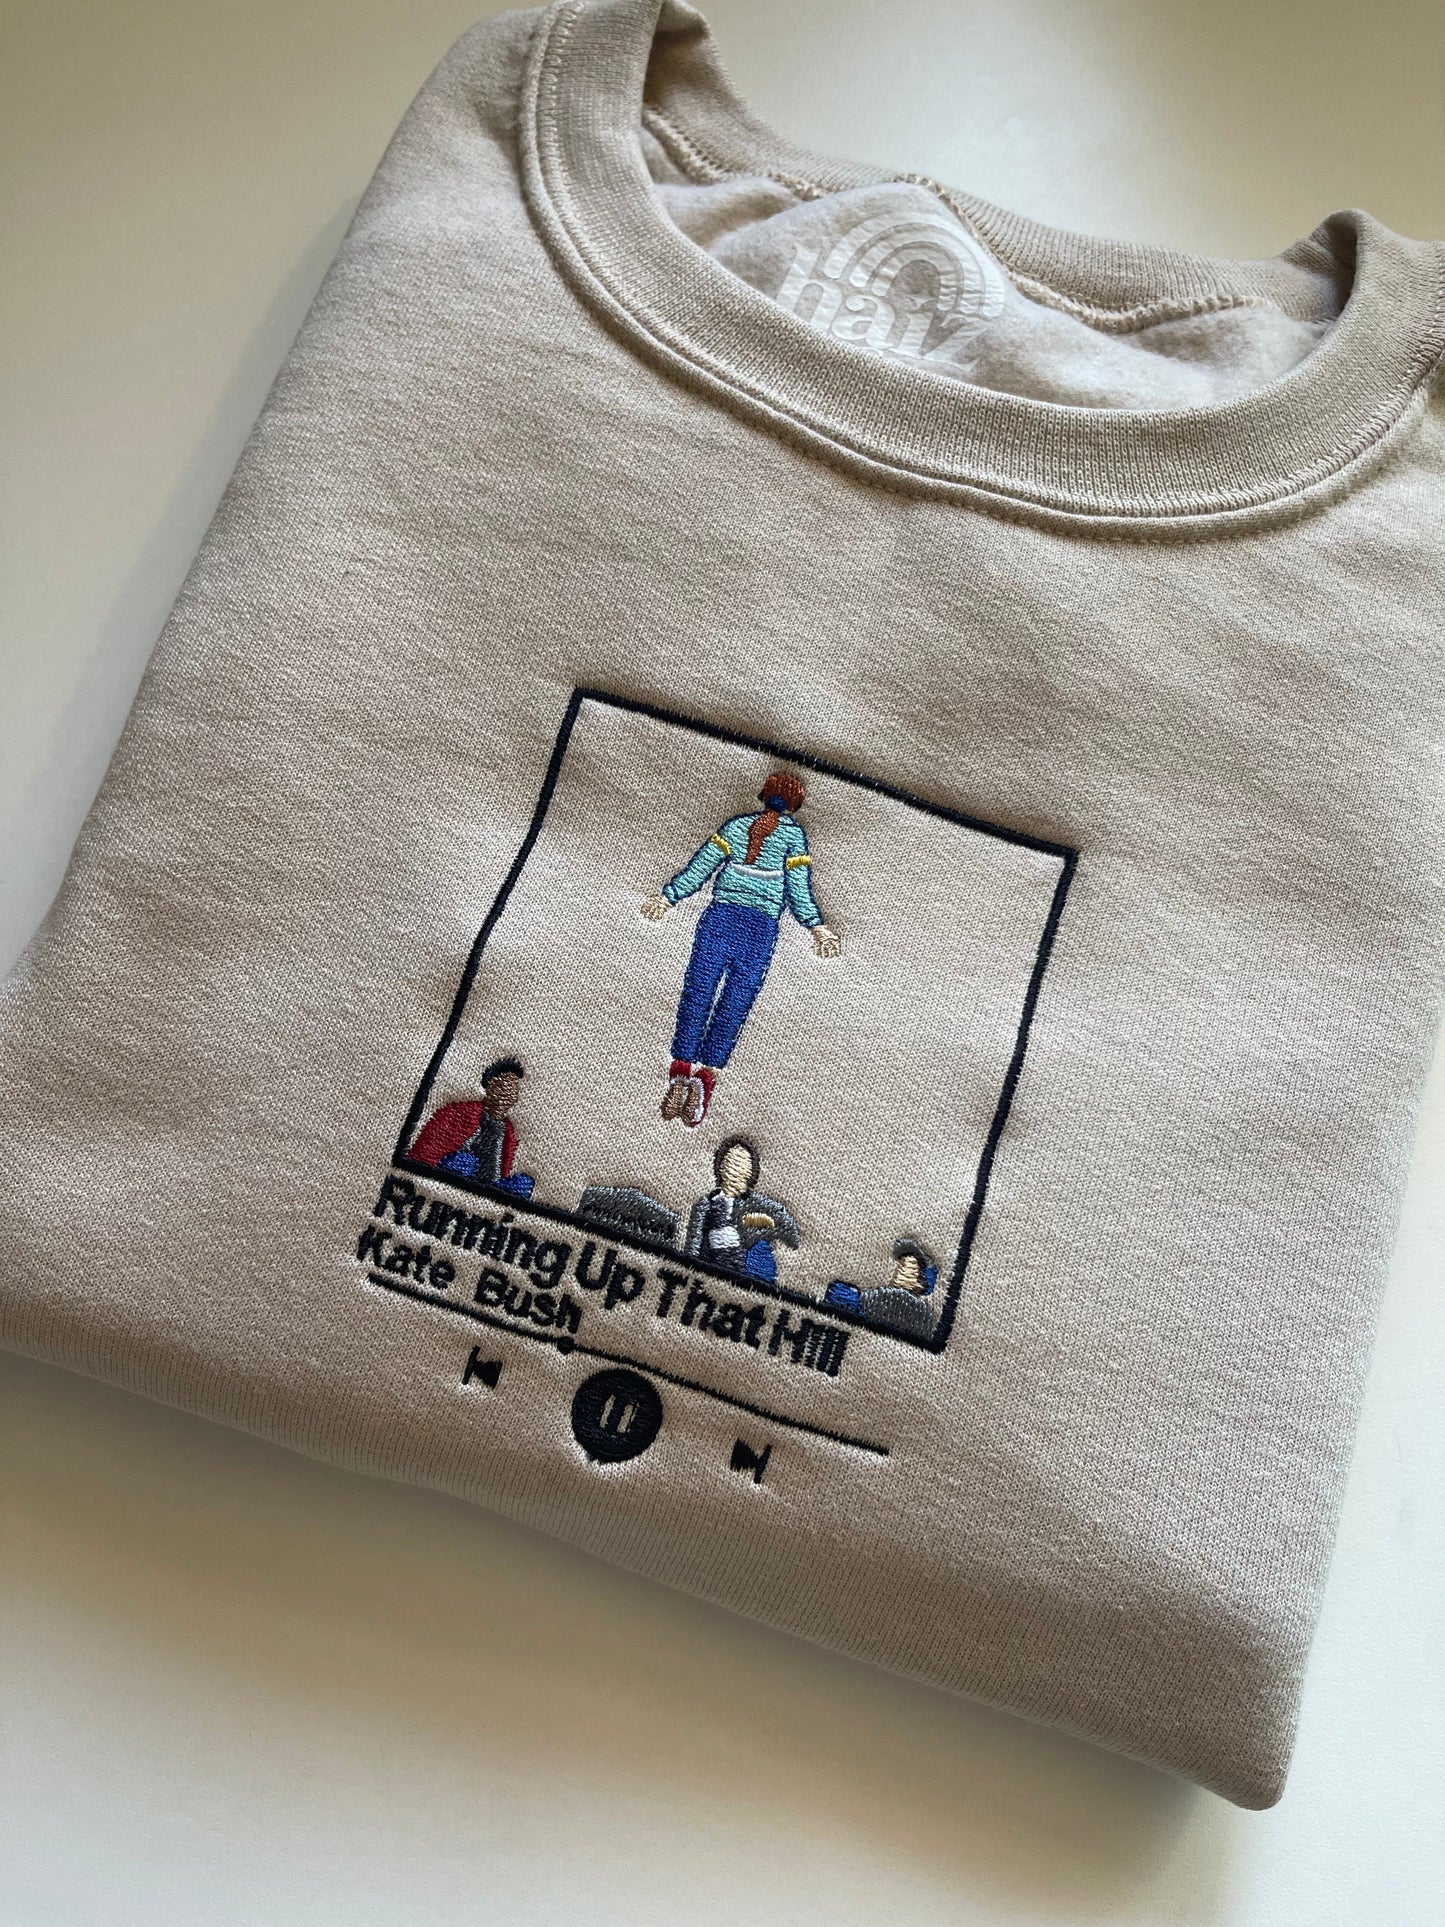 Running Up That Hill embroidered sweatshirt